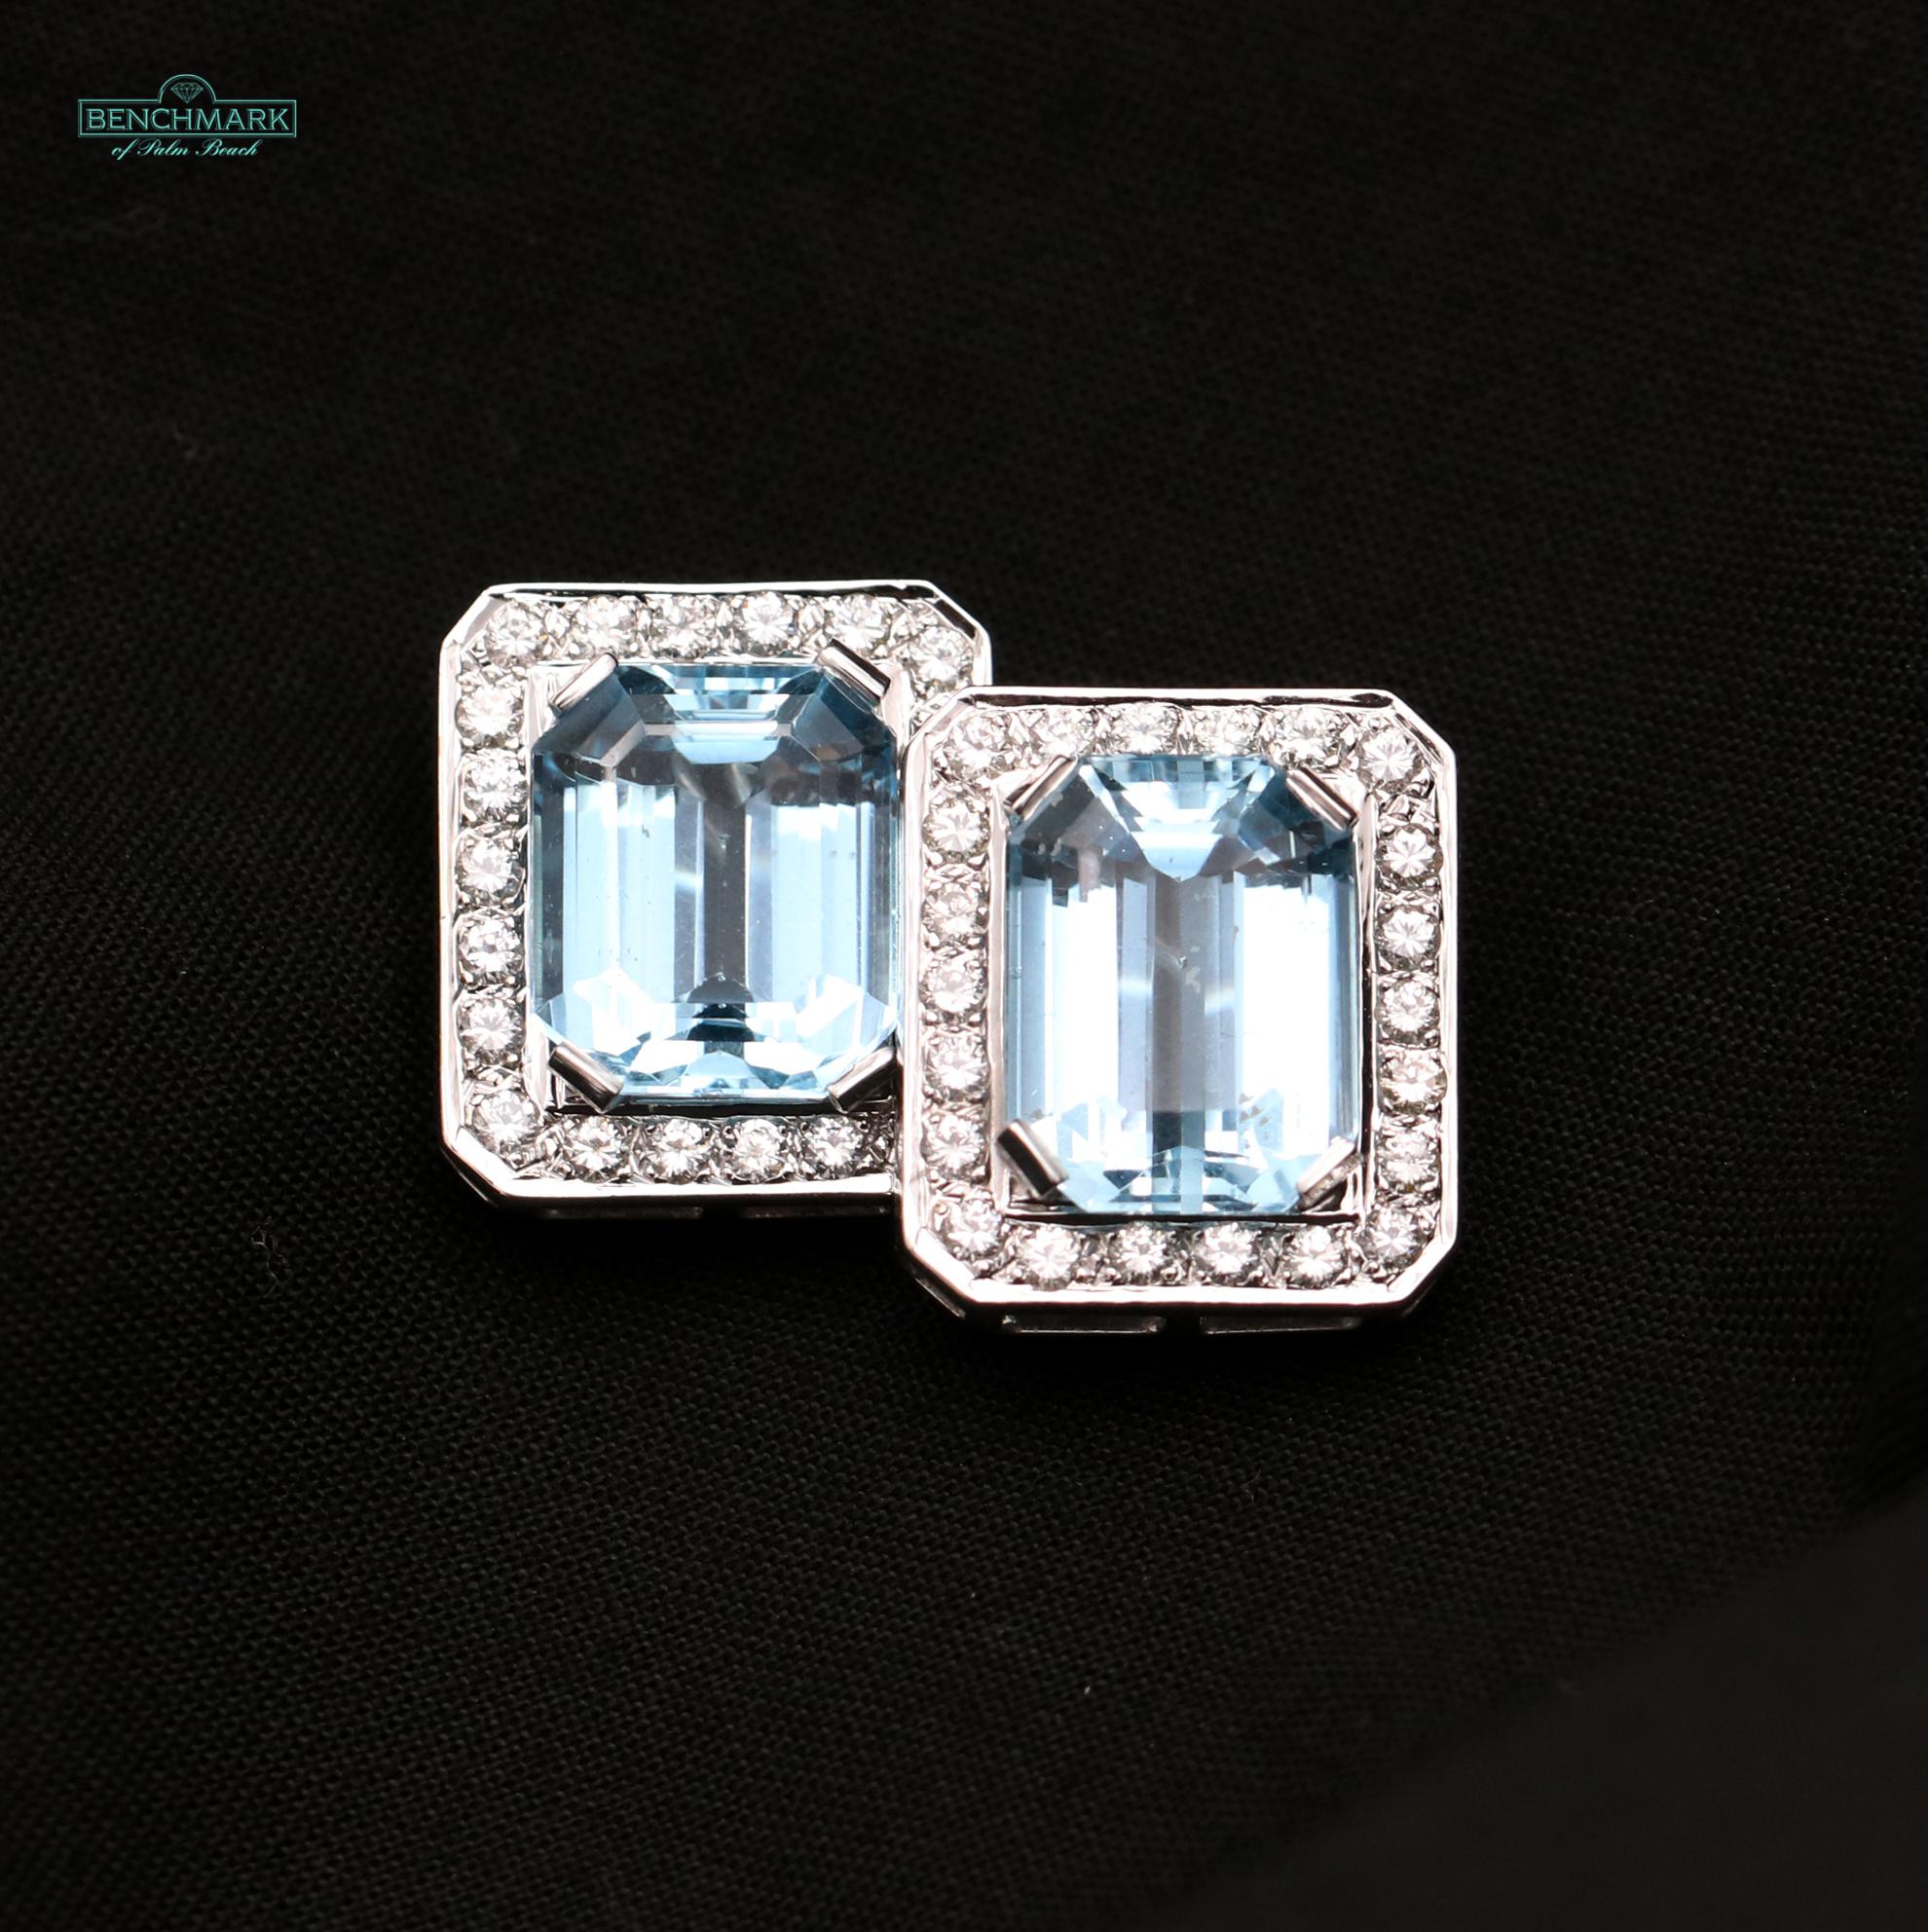 A pair of 14K white gold earrings, each centered around an emerald cut aquamarine, surrounded by 22 diamonds. Each earring measures 7/8 of an inch long and 3/4 of an inch wide, and is crafted in 14K white gold. They are a classic style, and are the